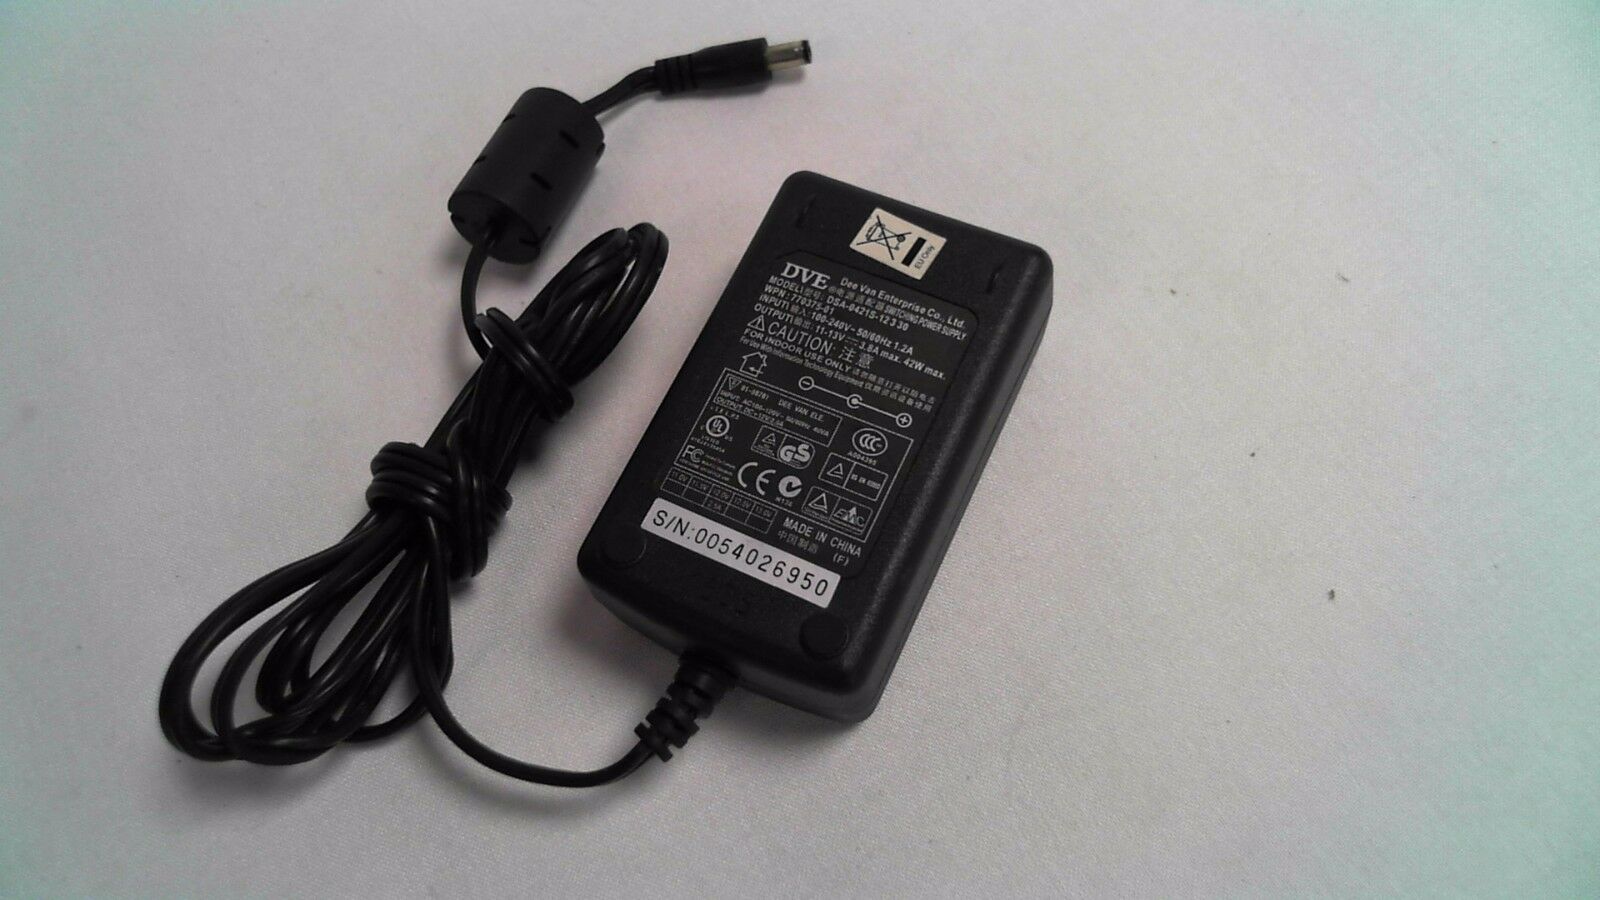 DVE AC ADAPTER Charger 11V - 13V 3.8A DSA-0421S-12 3 30 #24A240 Compatible Brand: DVE Type: Power Adapter MPN: DSA- - Click Image to Close